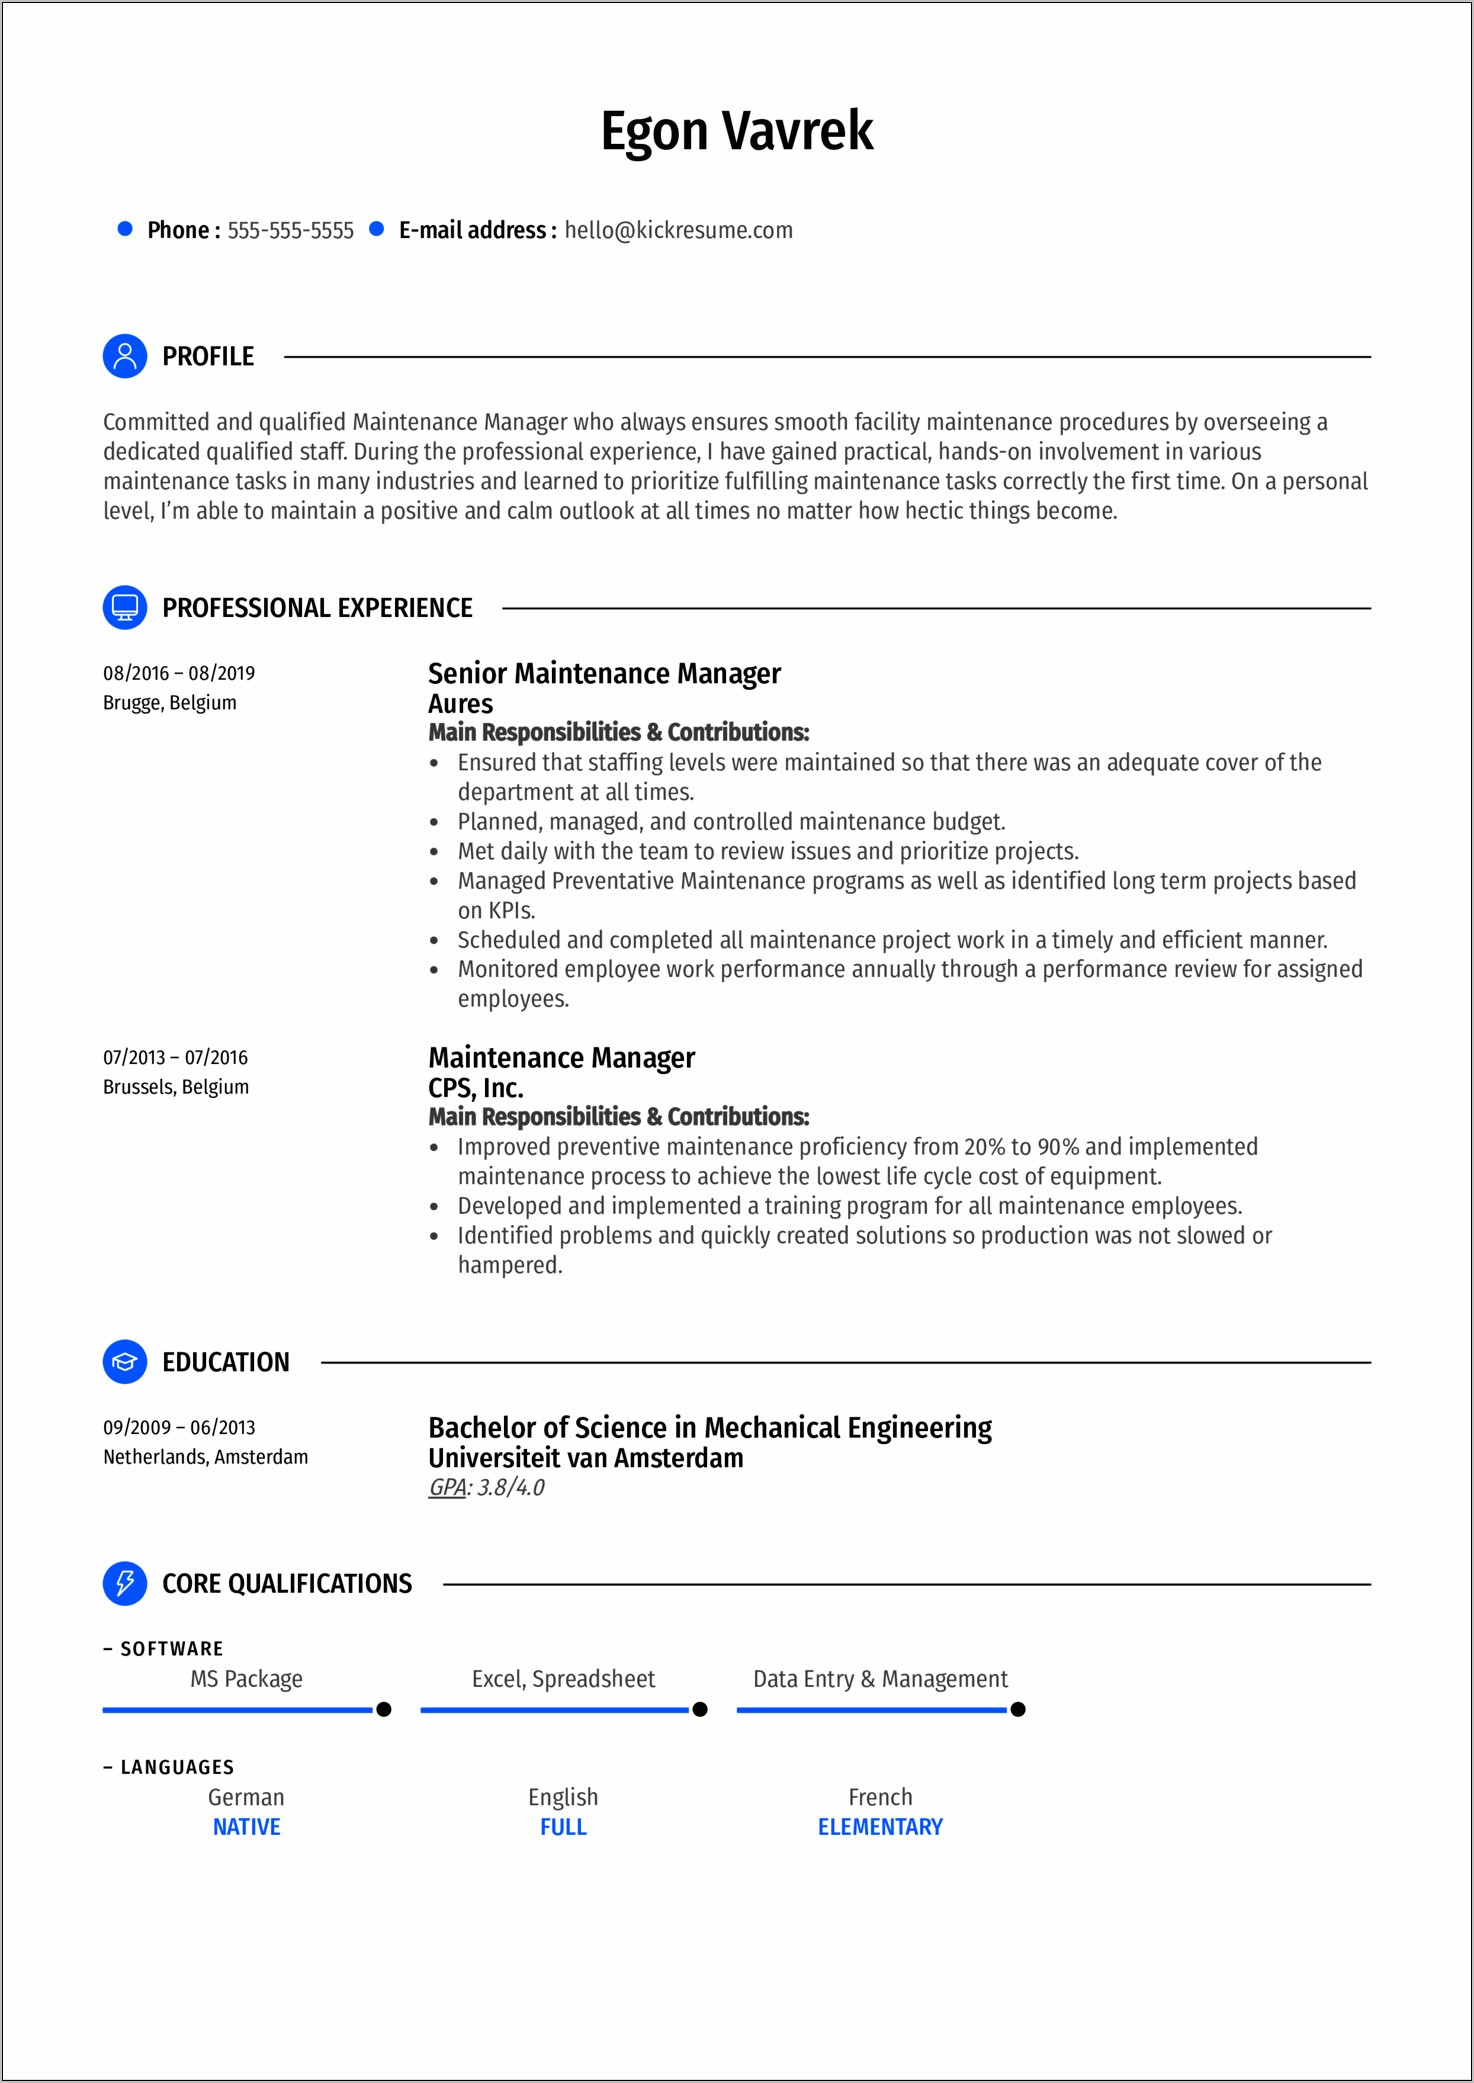 Good Resume Objective For Industrial